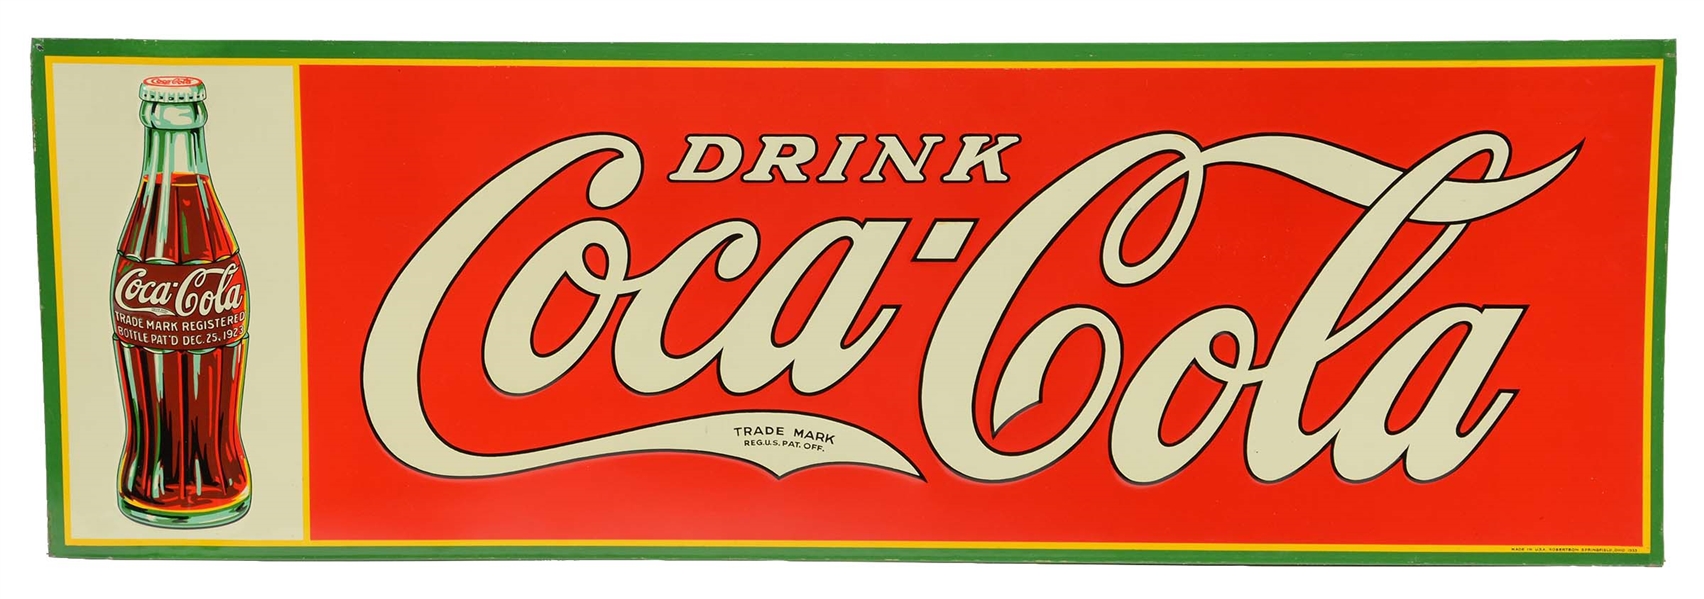 1933 EMBOSSED TIN DRINK COCA-COLA SIGN.